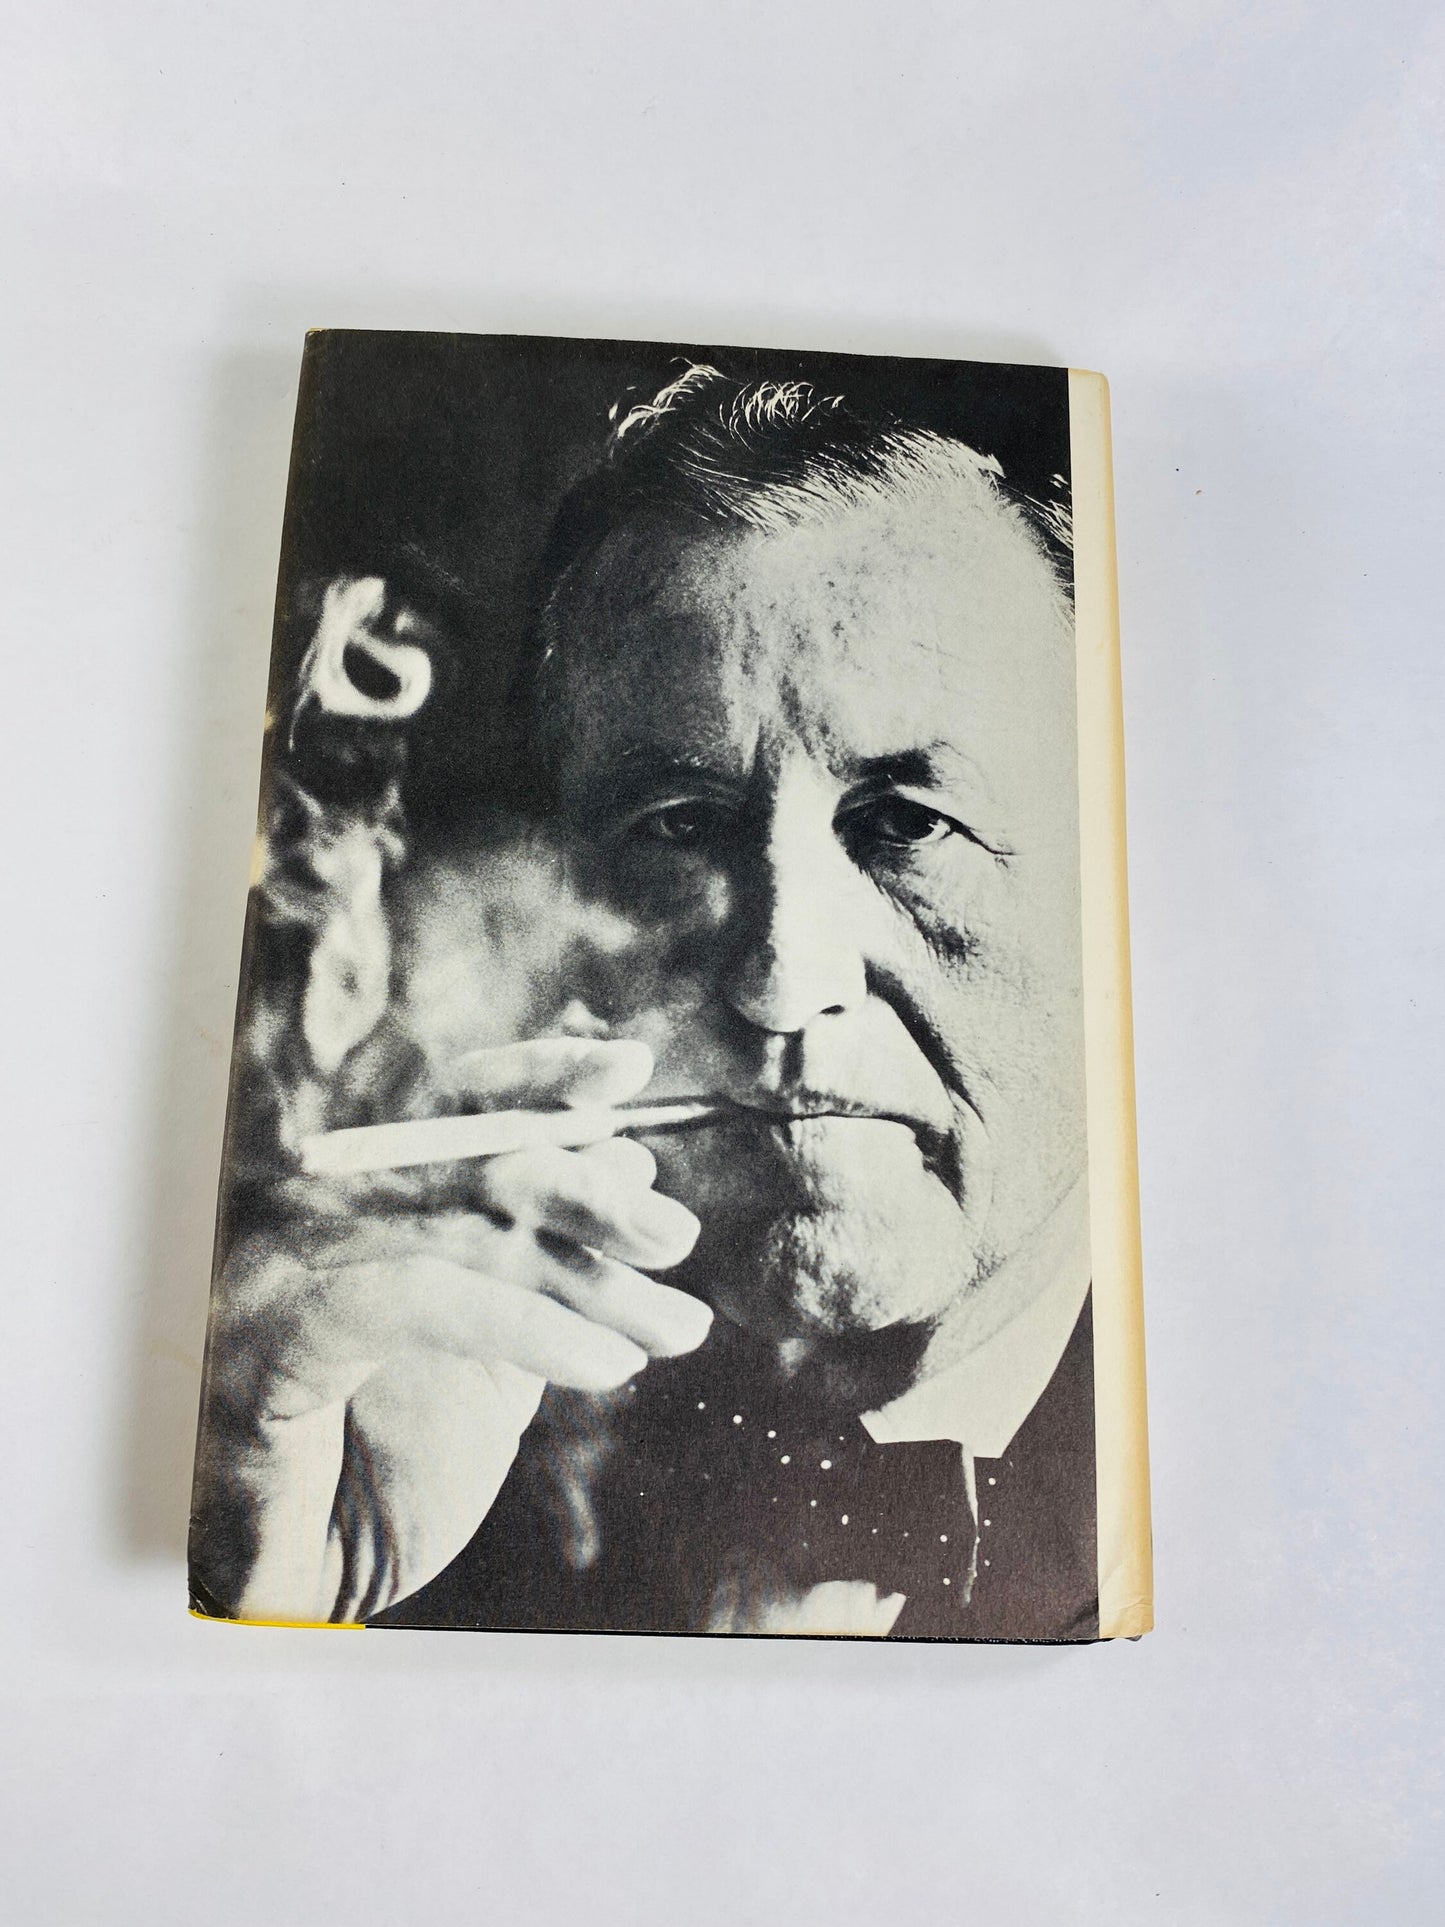 James Bond The Man with the Golden Gun vintage book by Ian Fleming EARLY PRINTING circa 1965 with dust jacket BCE